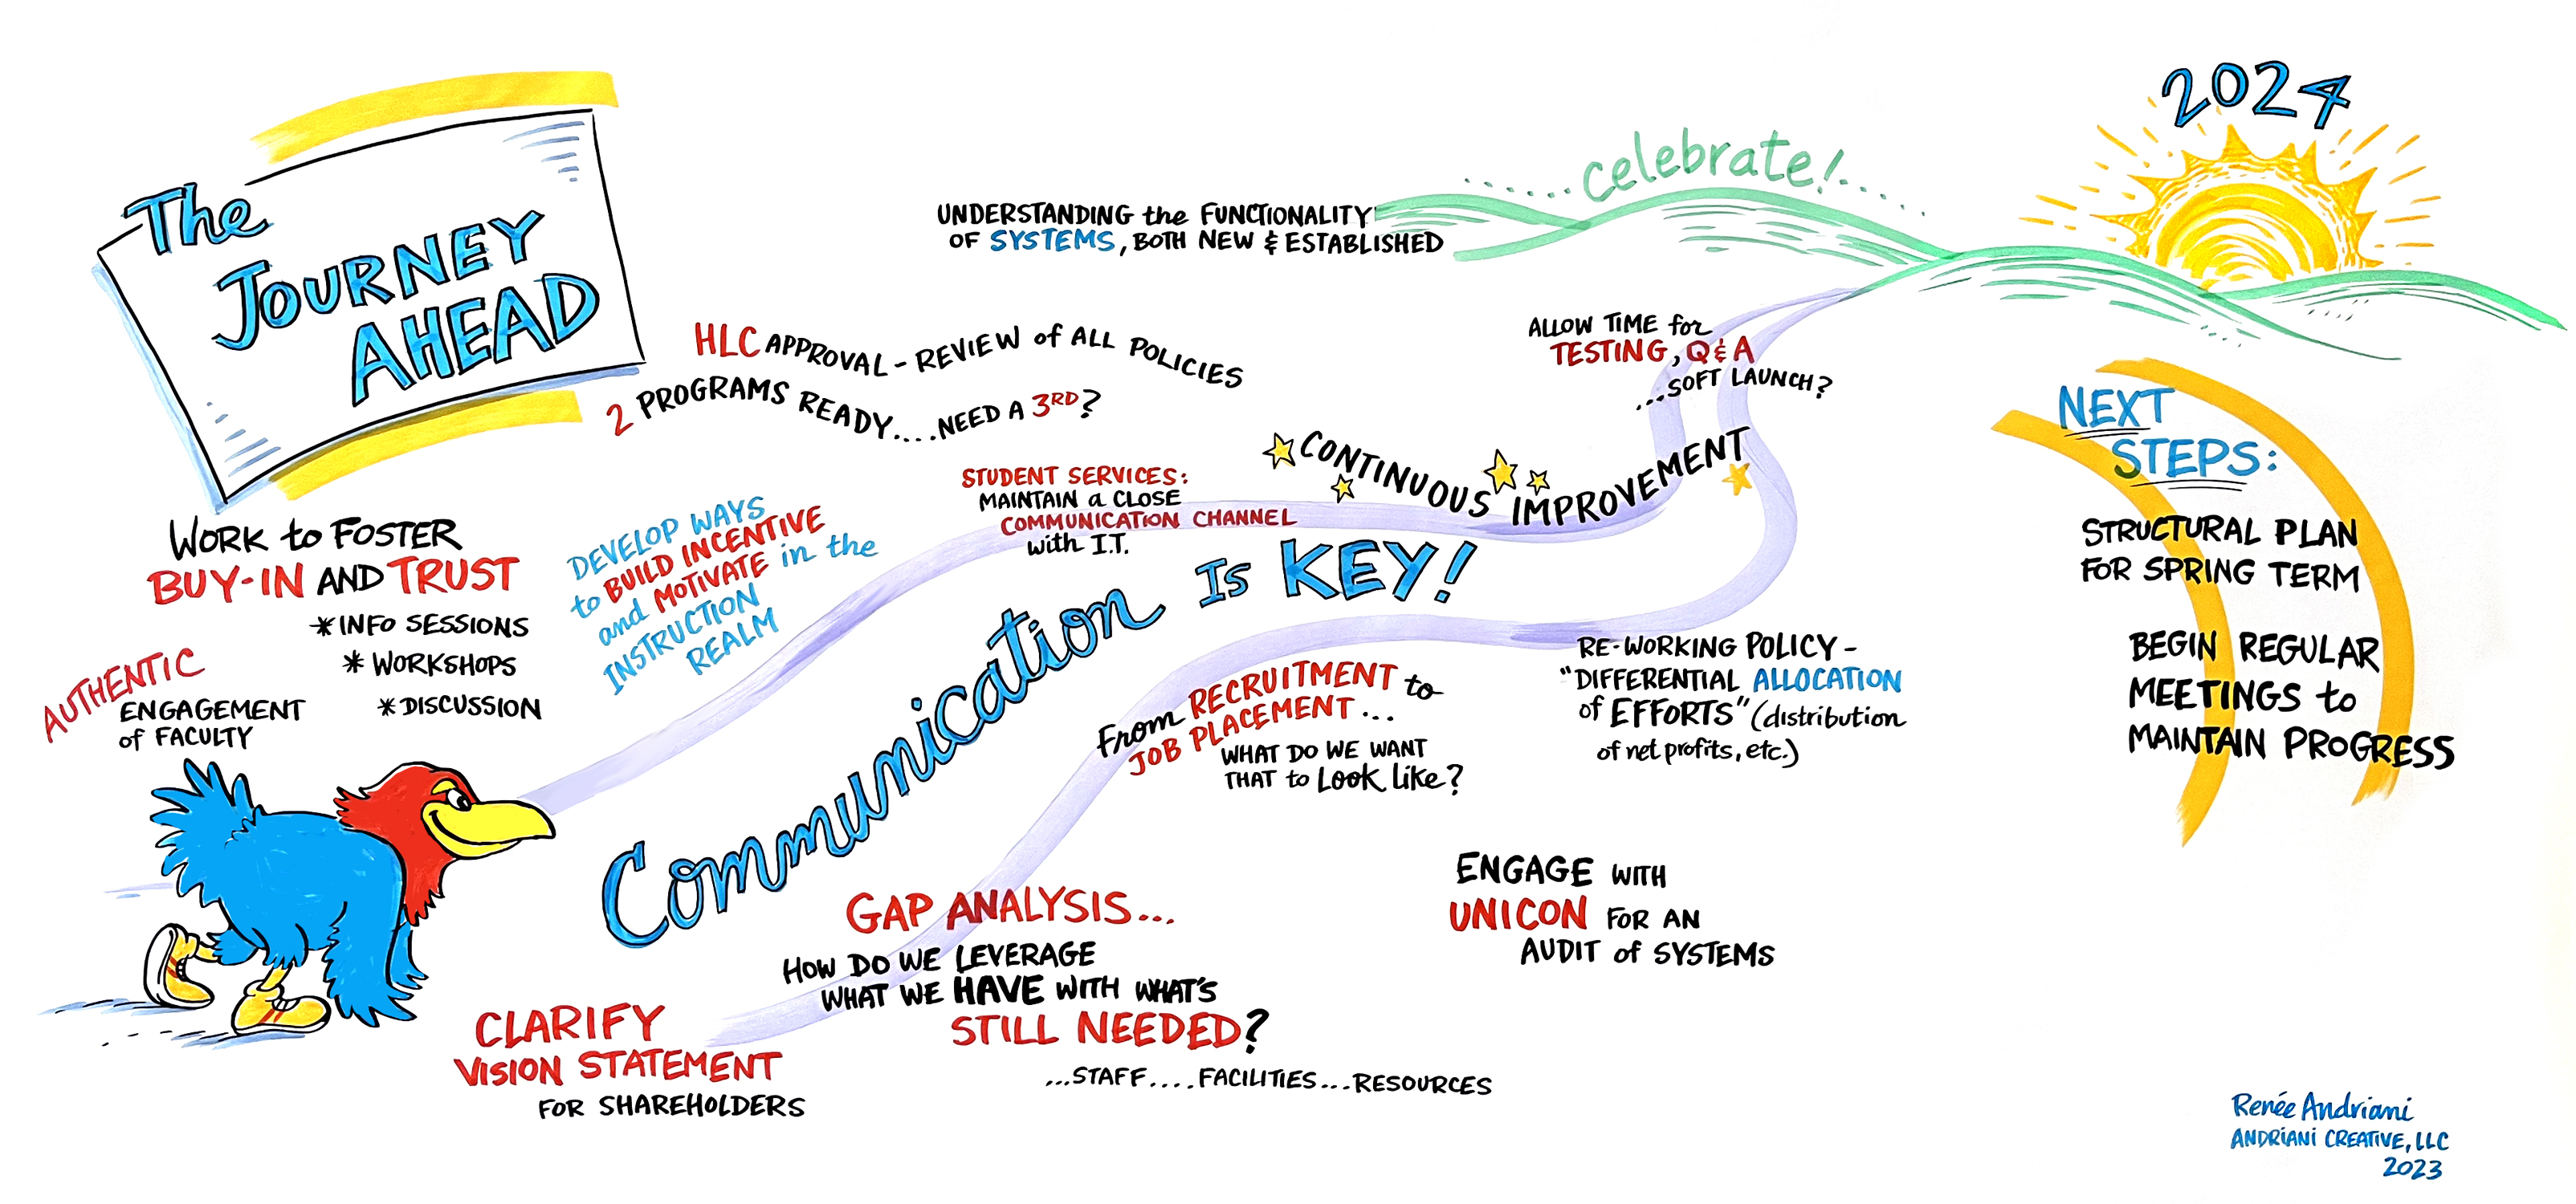 Graphic recording from the CBE at KU Design Charrette by Renee Andriani